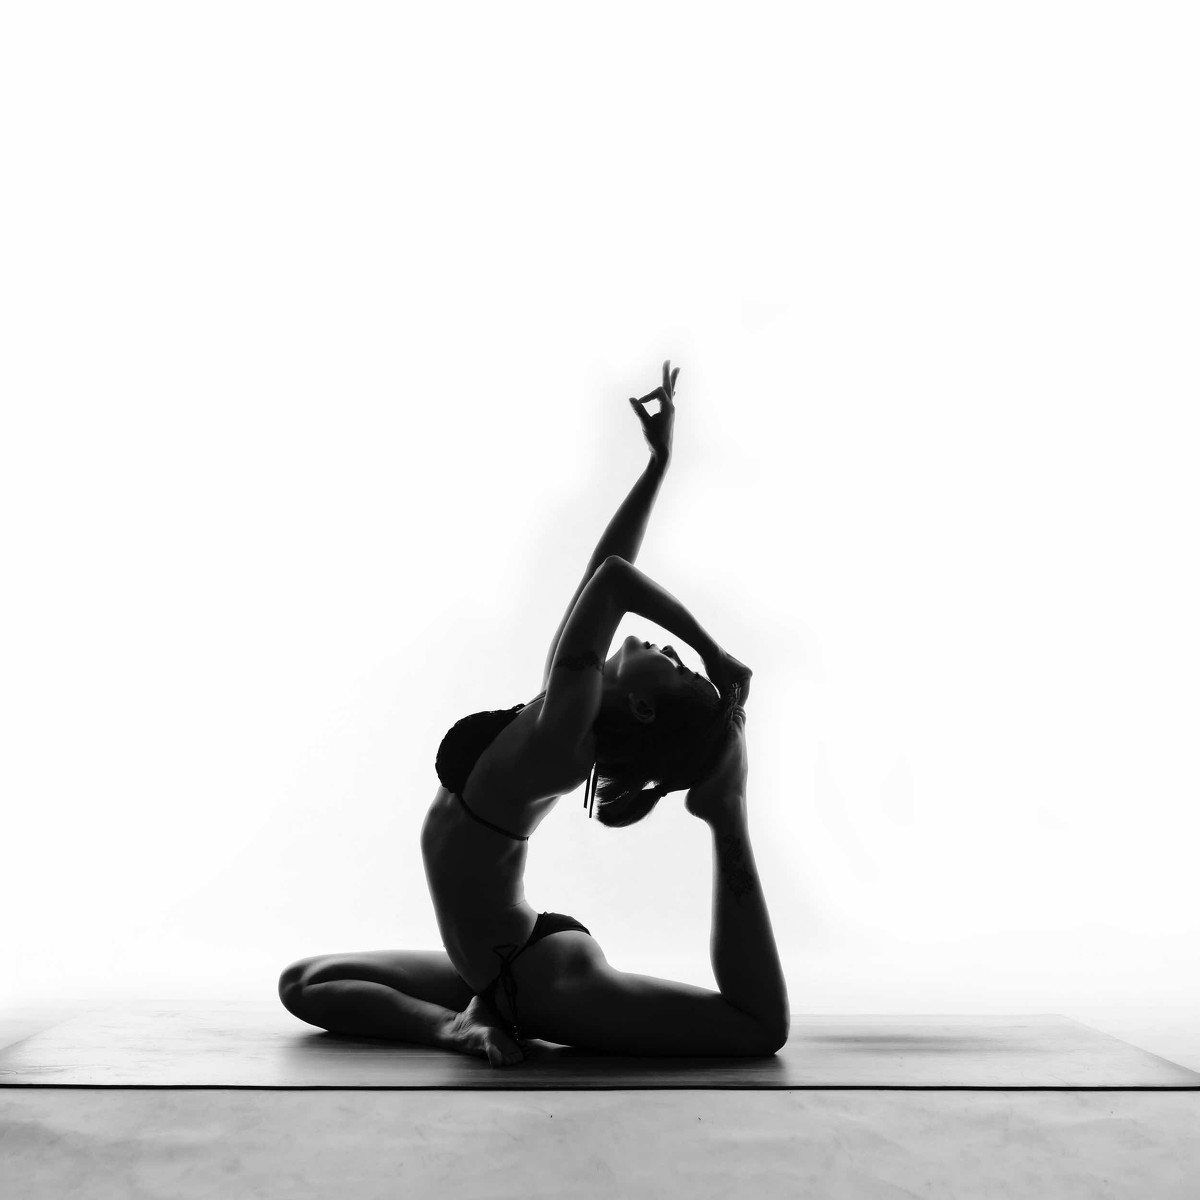 Do you know that three "repair" yoga poses soothe the body and mind